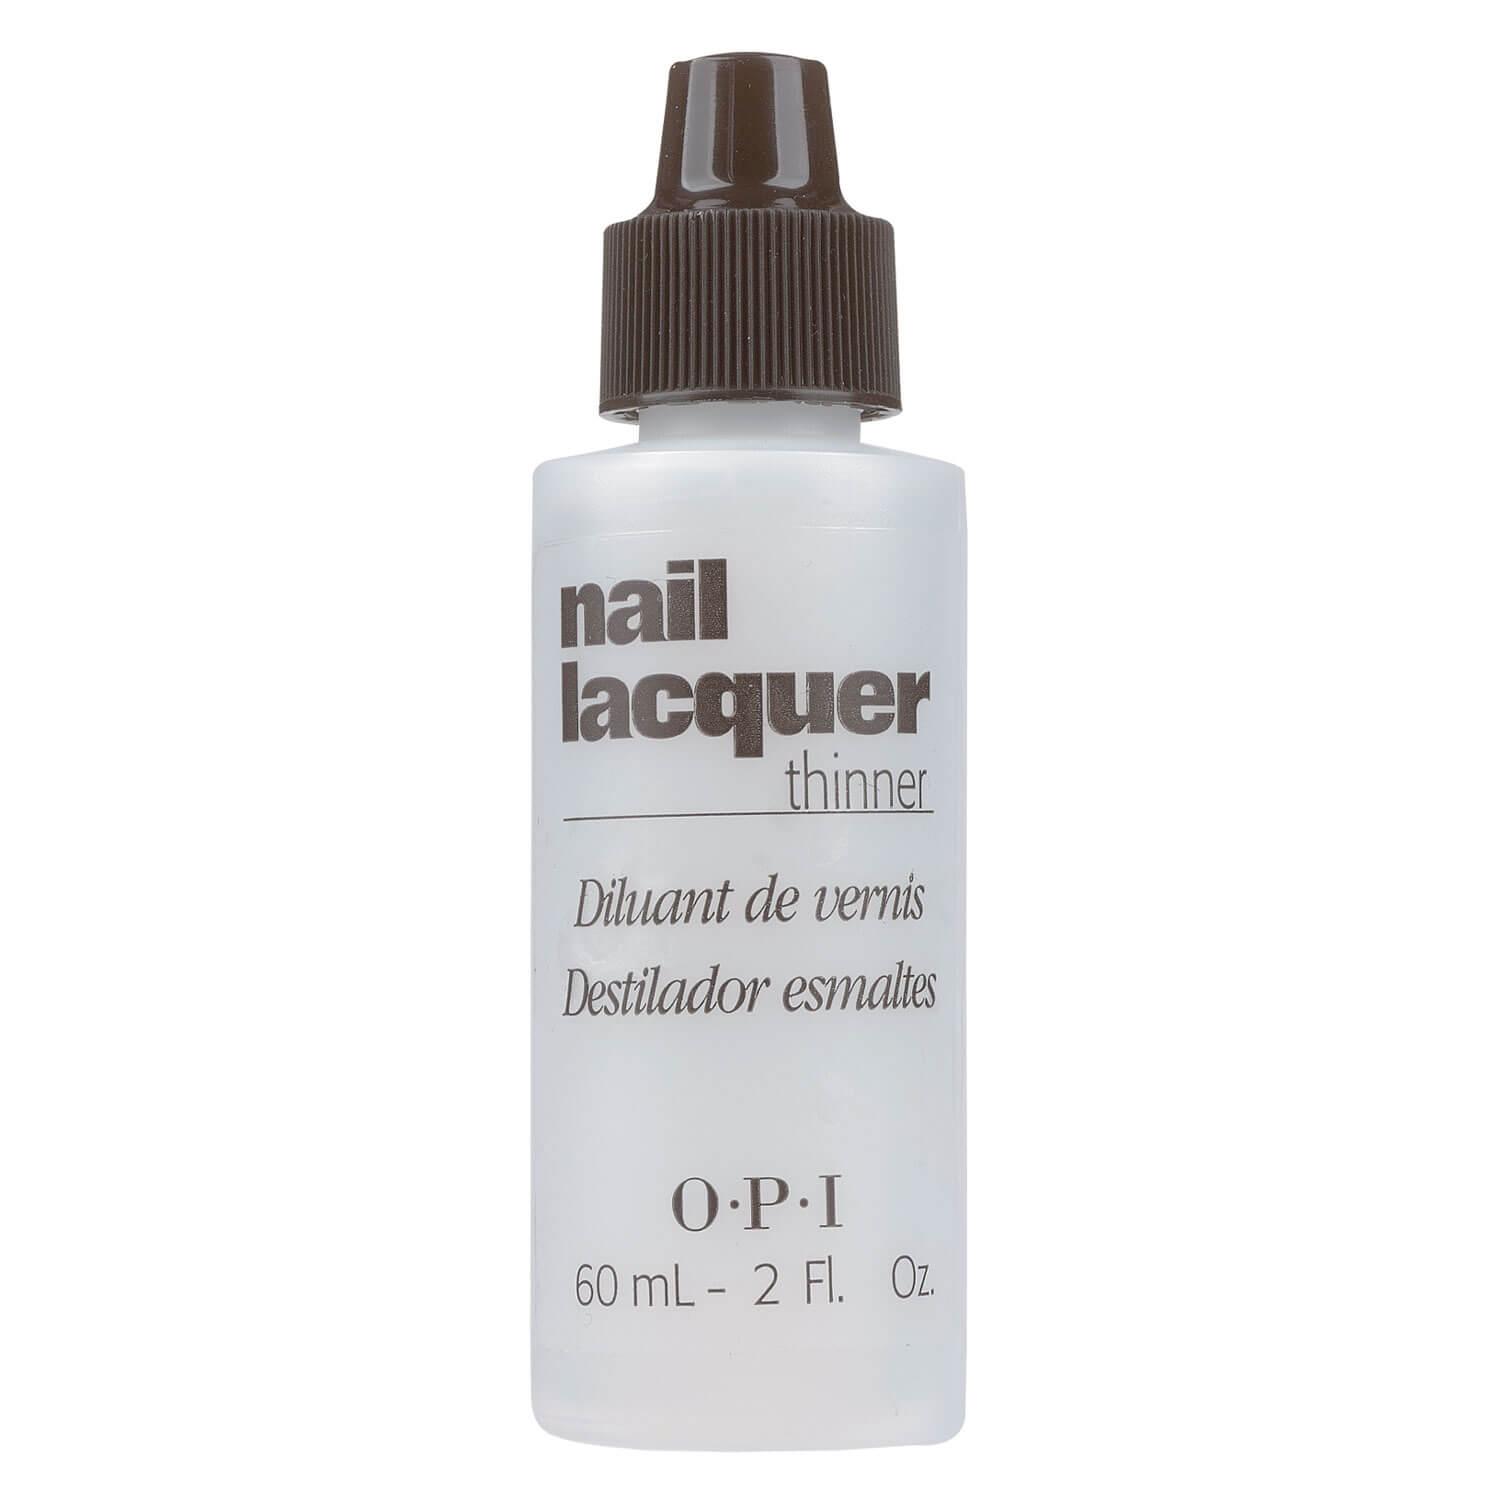 Diluant de vernis - Nail lacquer thinner